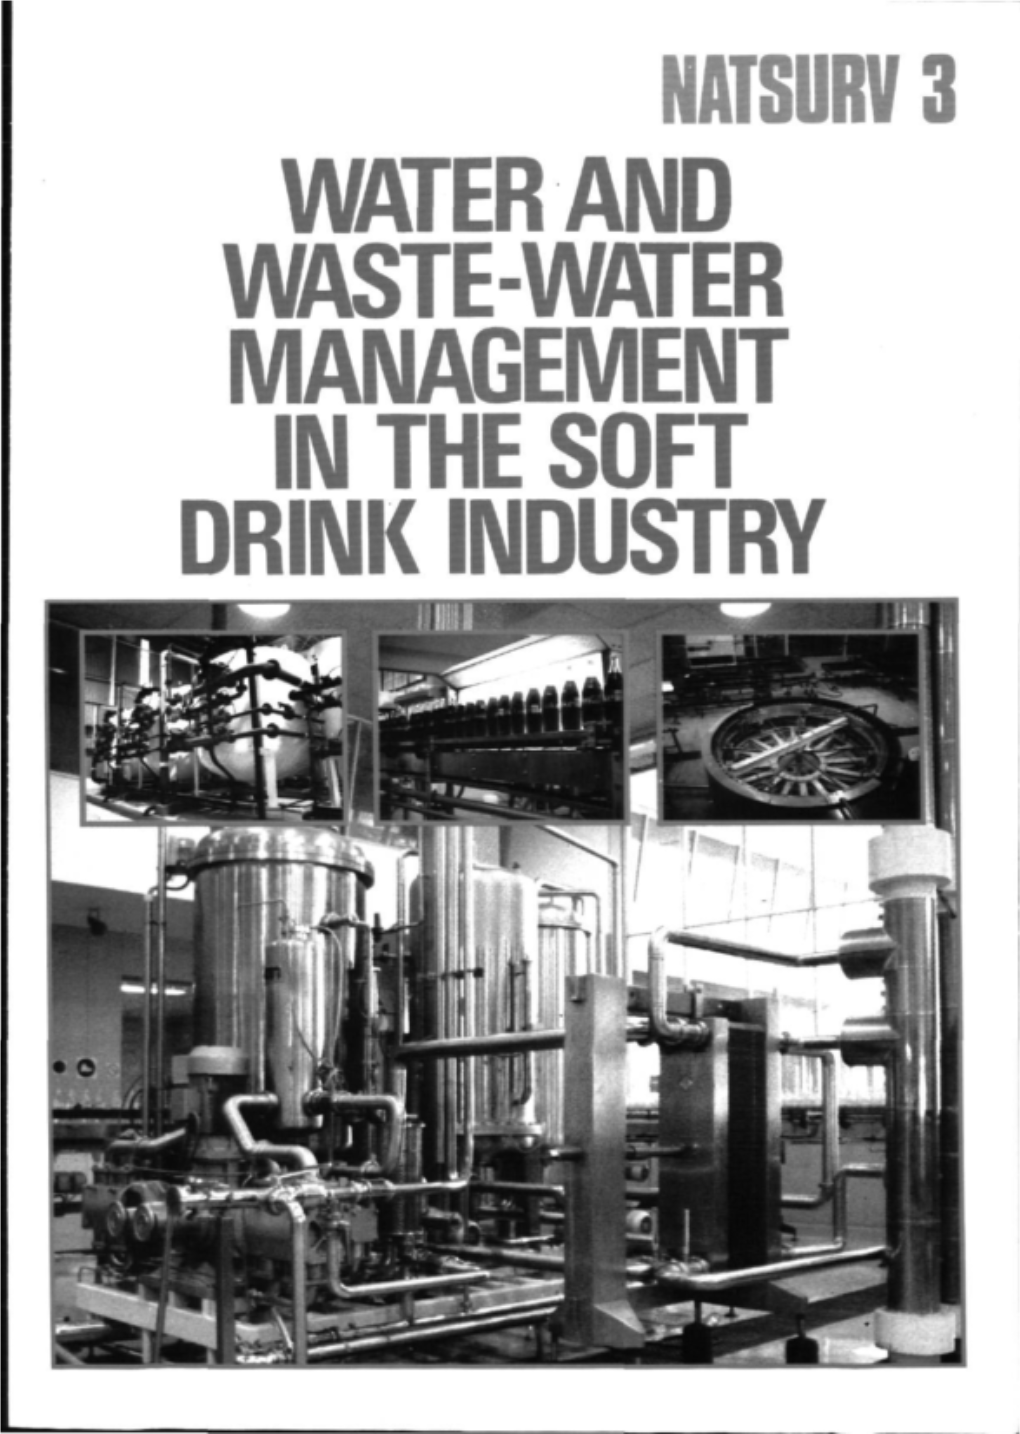 Water and Waste-Water Management the Soft Drink Industry Natsurv 3